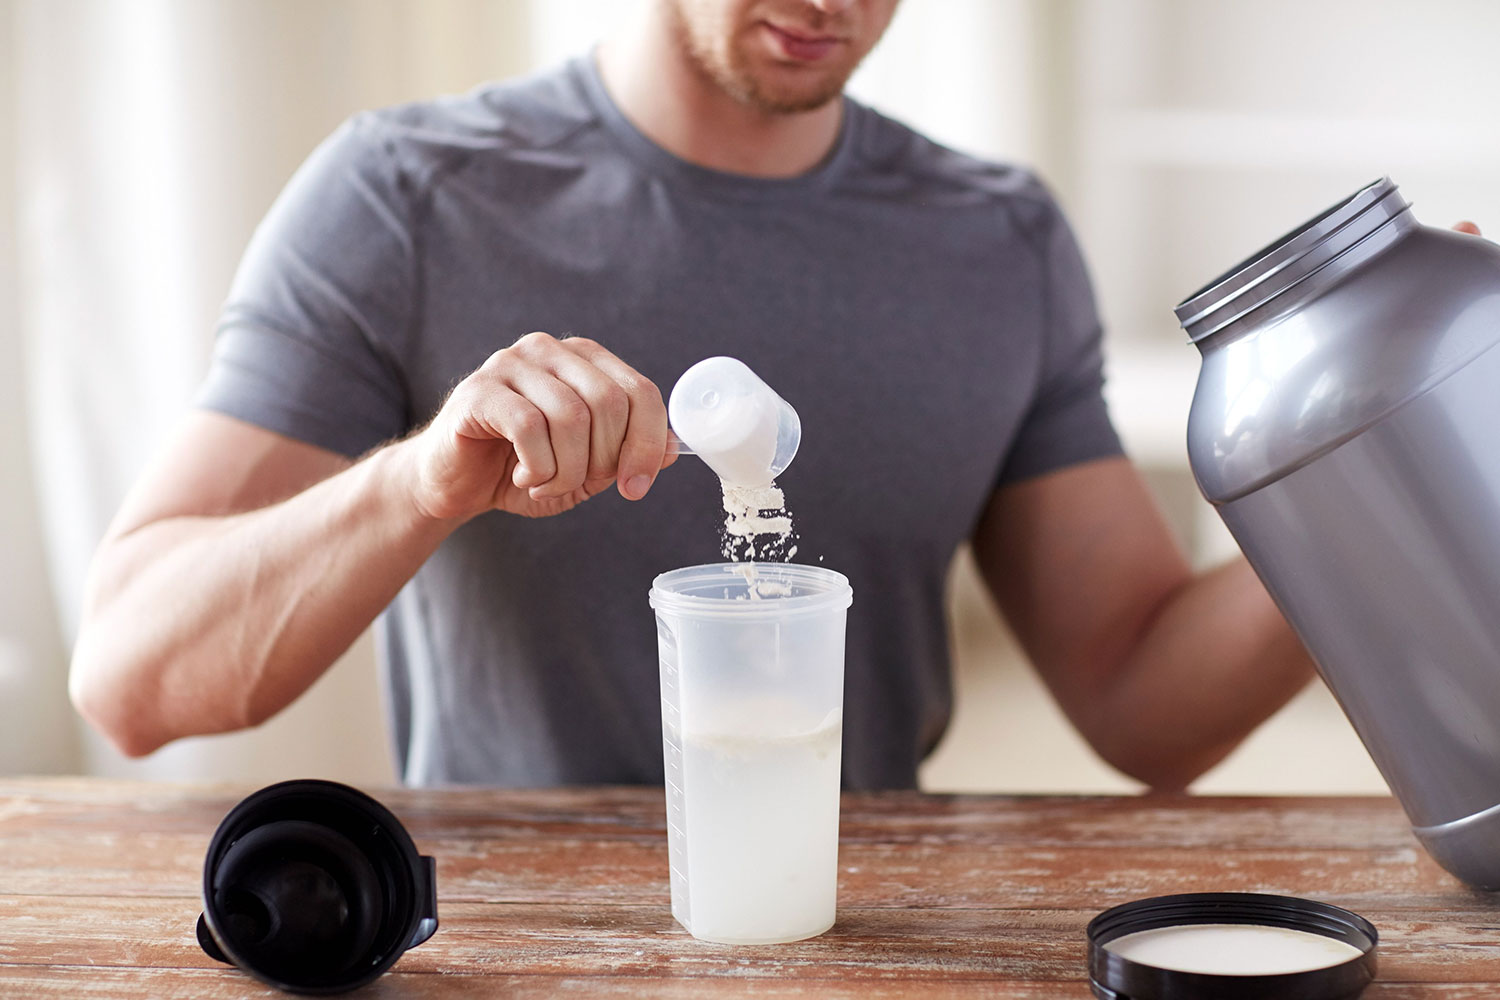 Creatine: This Important Supplement Could Transform Your Black Box VR Workout